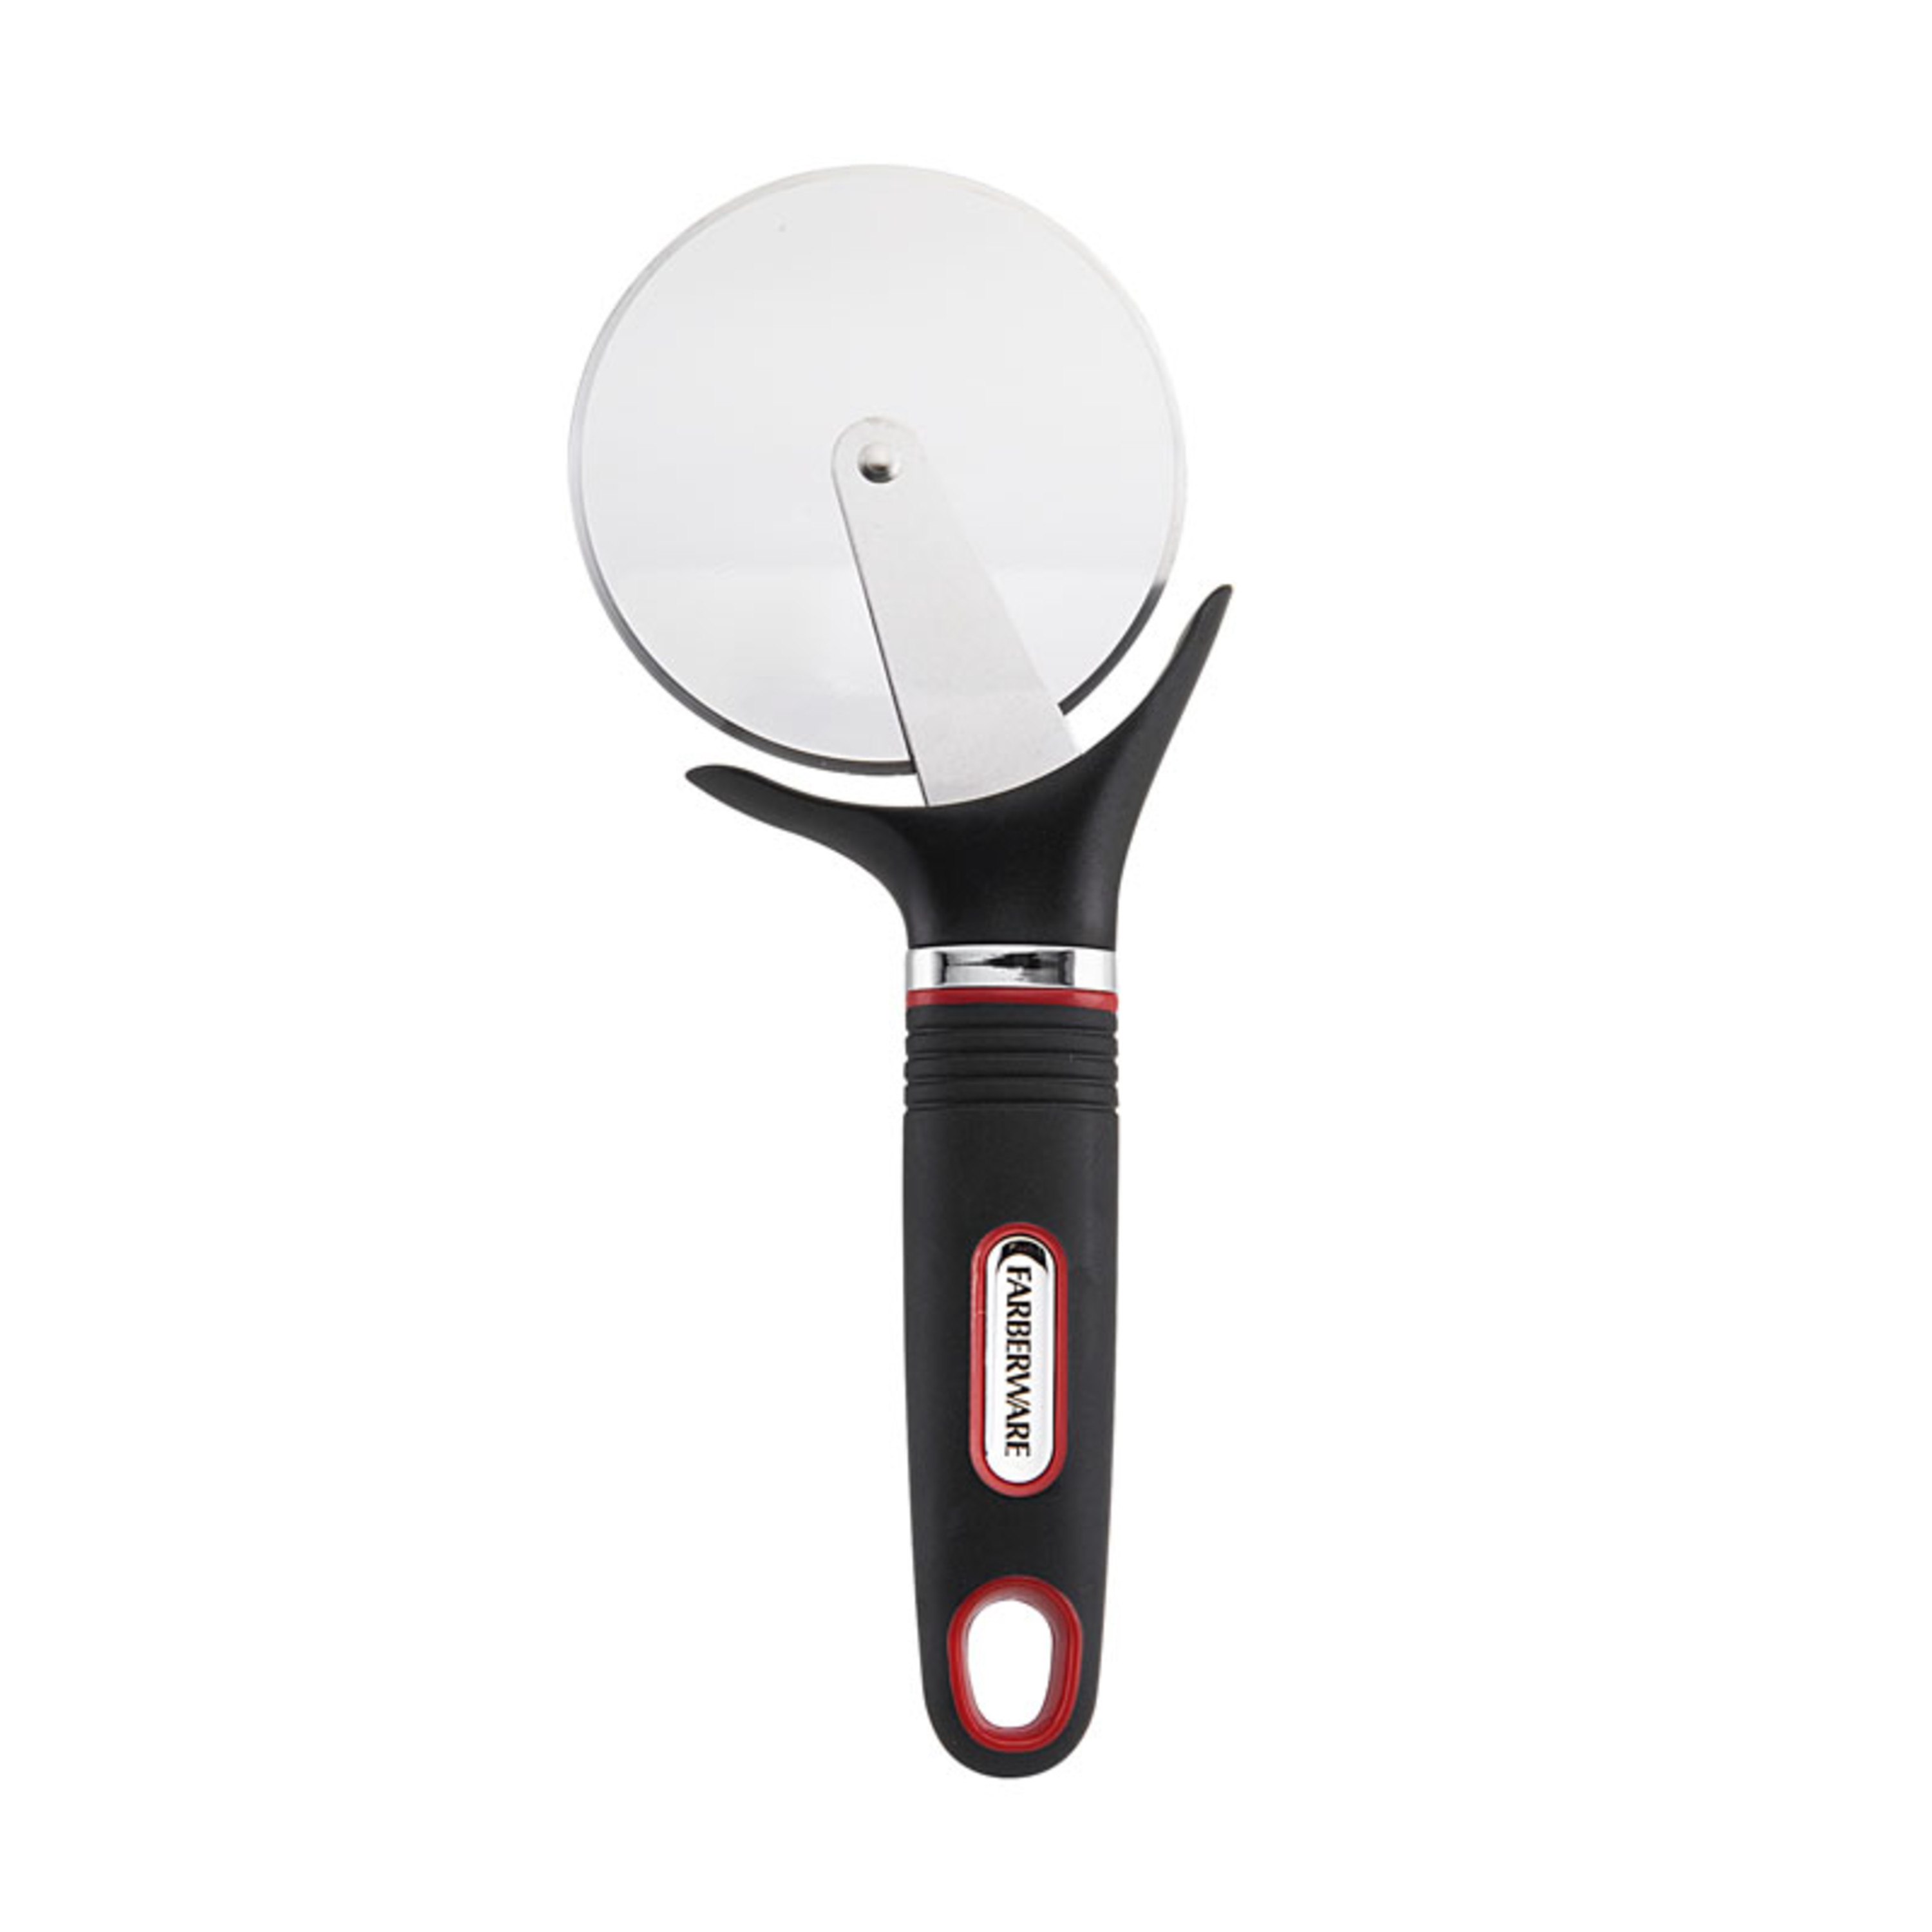 Farberware Soft Grips Pizza Cutter with Red and Black Handle - image 1 of 8